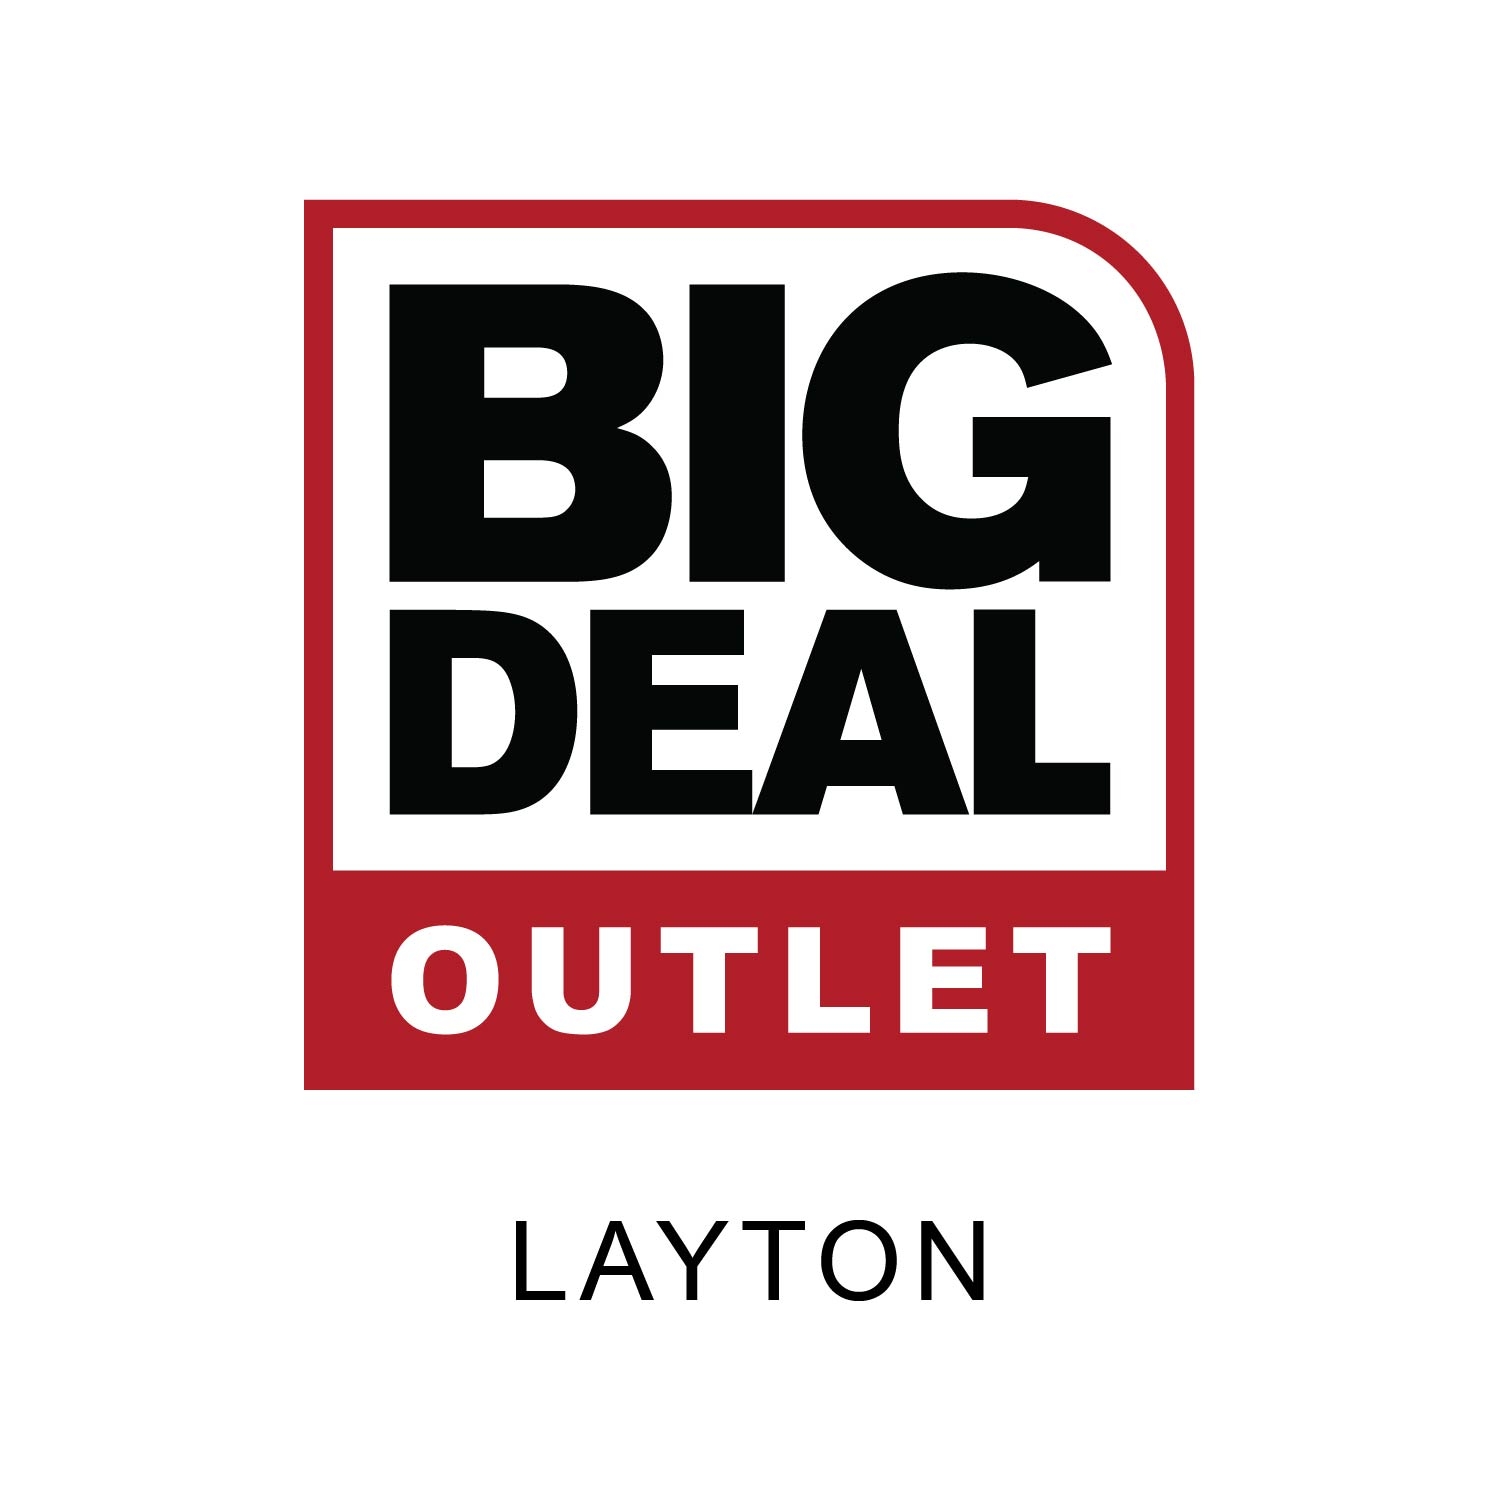 Company logo of Big Deal Outlet